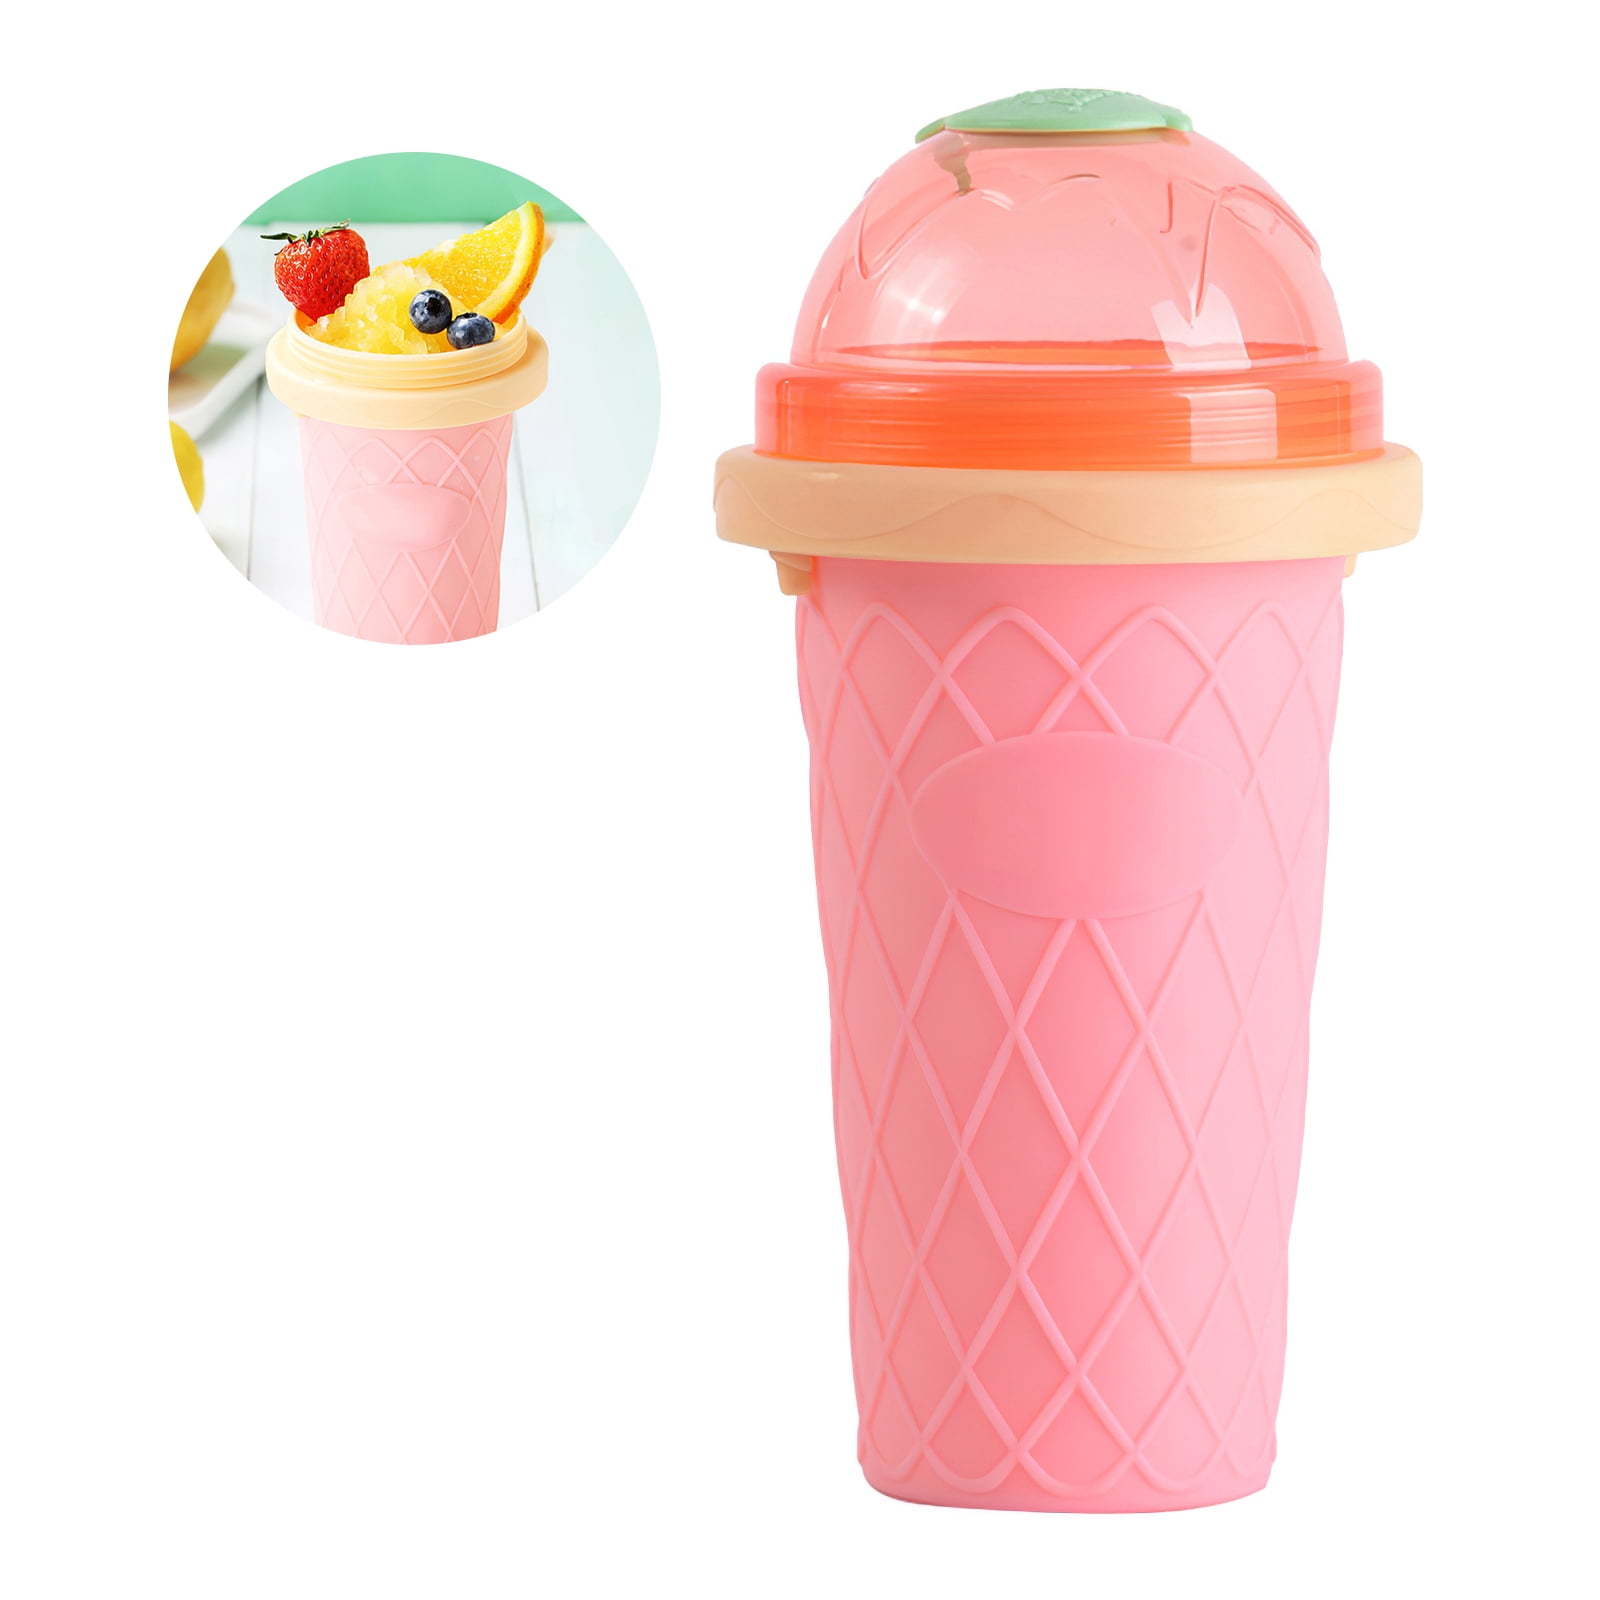 Silicone Slushy Cup Frozen ICY Smoothie Smoothie Quickly Maker Squeeze Cup Cooler Smoothie Cup Pinch Into Ice Slushy Ice Cup